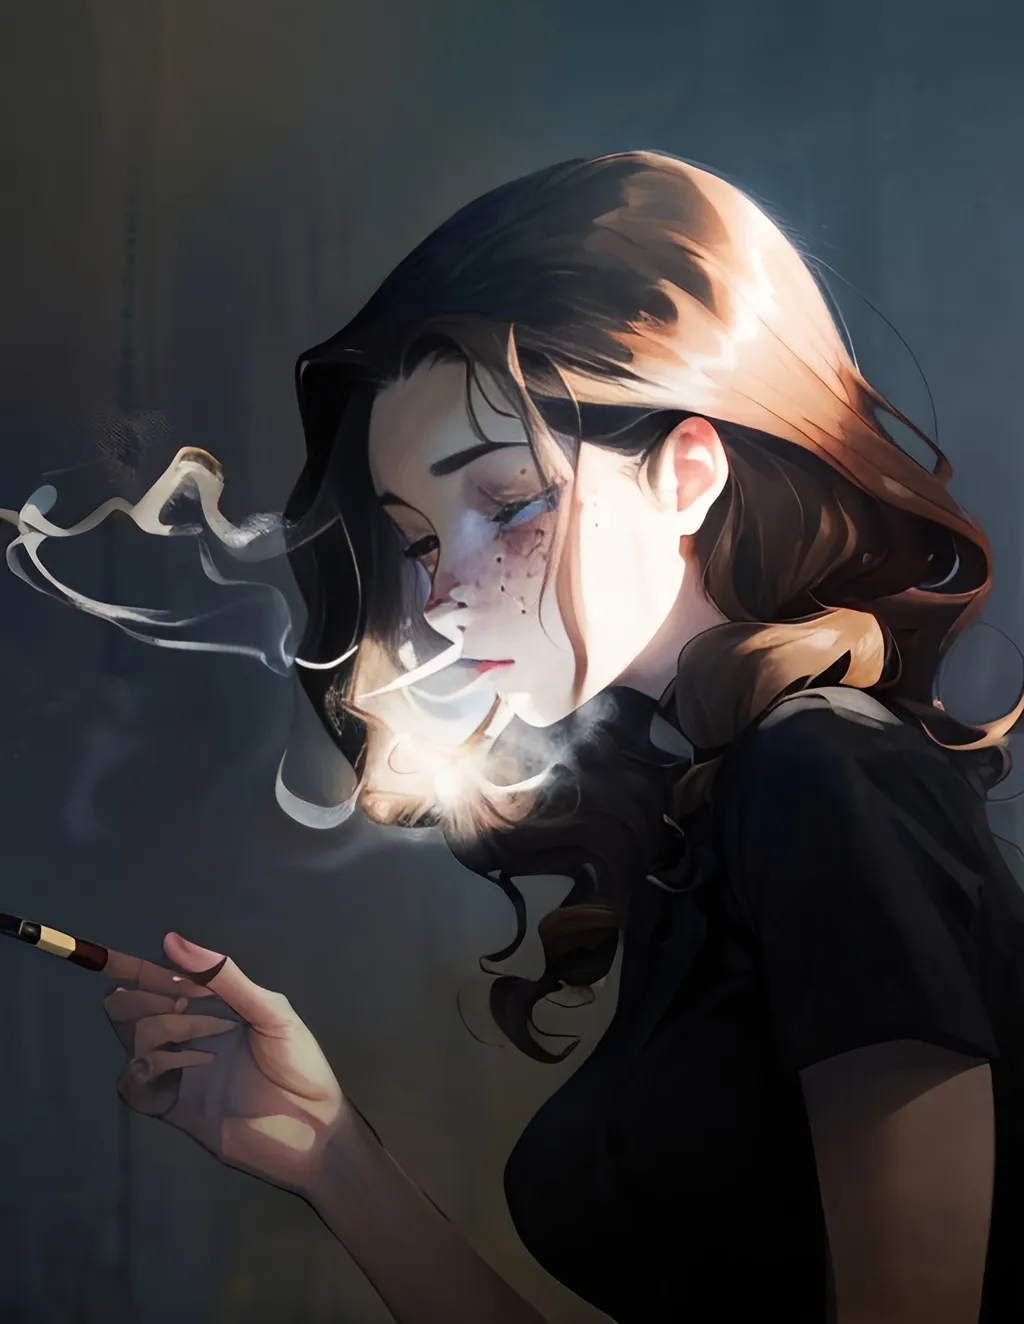 Prompt: A woman smoking, She has long curly brown hair and faint freckles